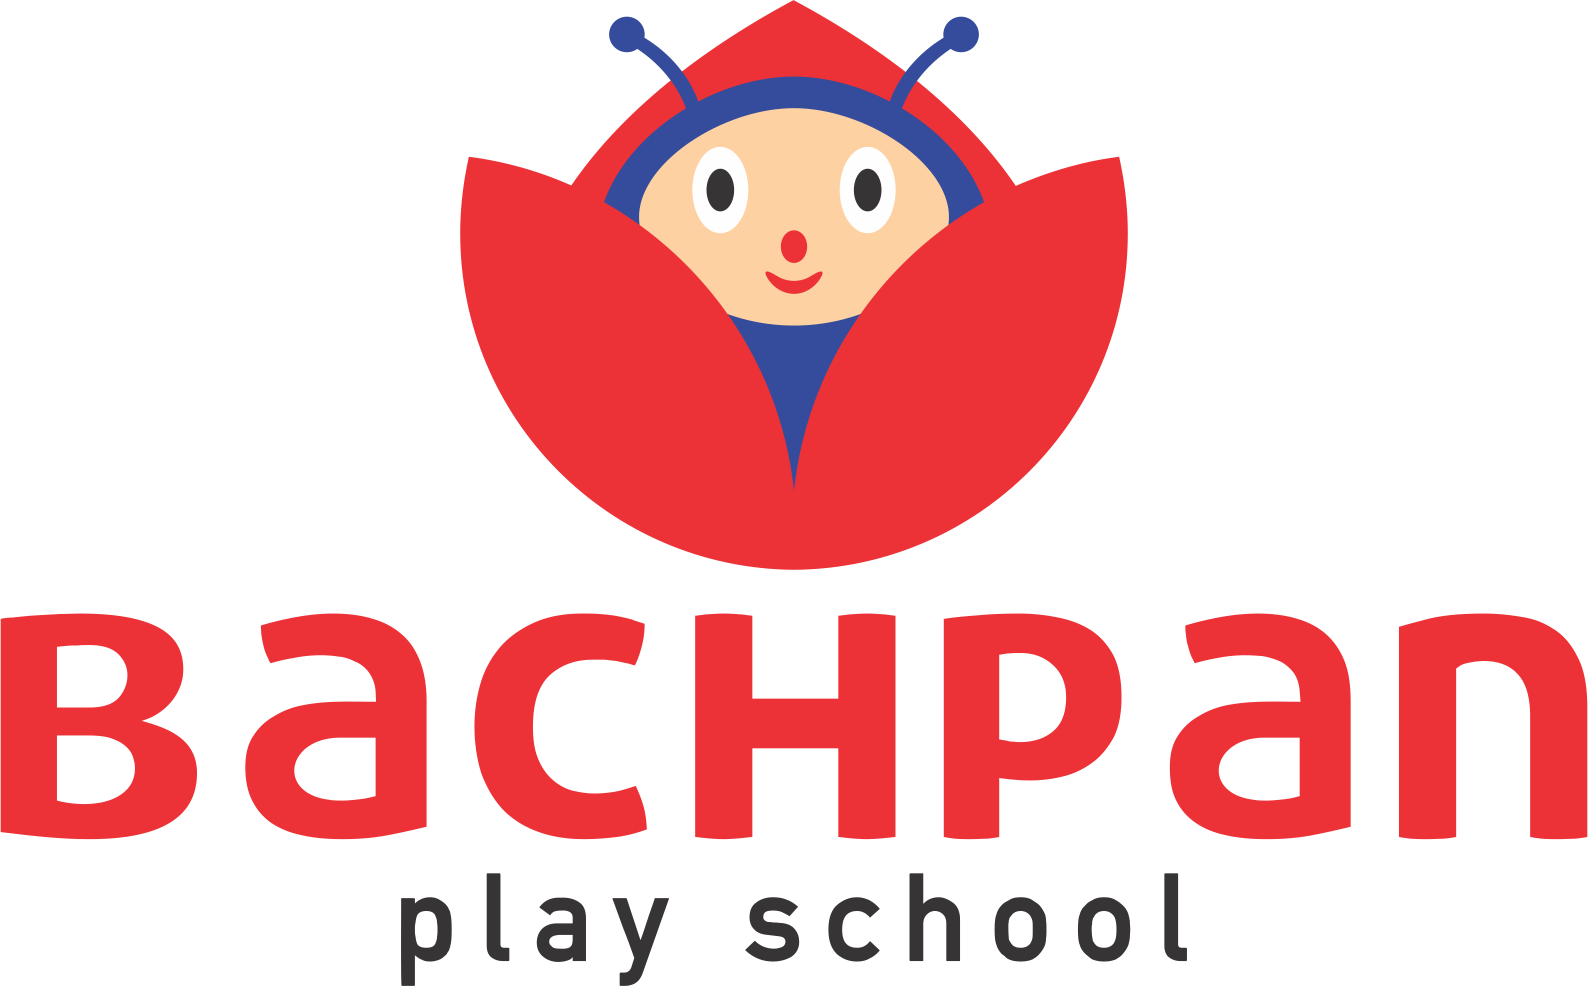 Bachpan A Play School|Colleges|Education